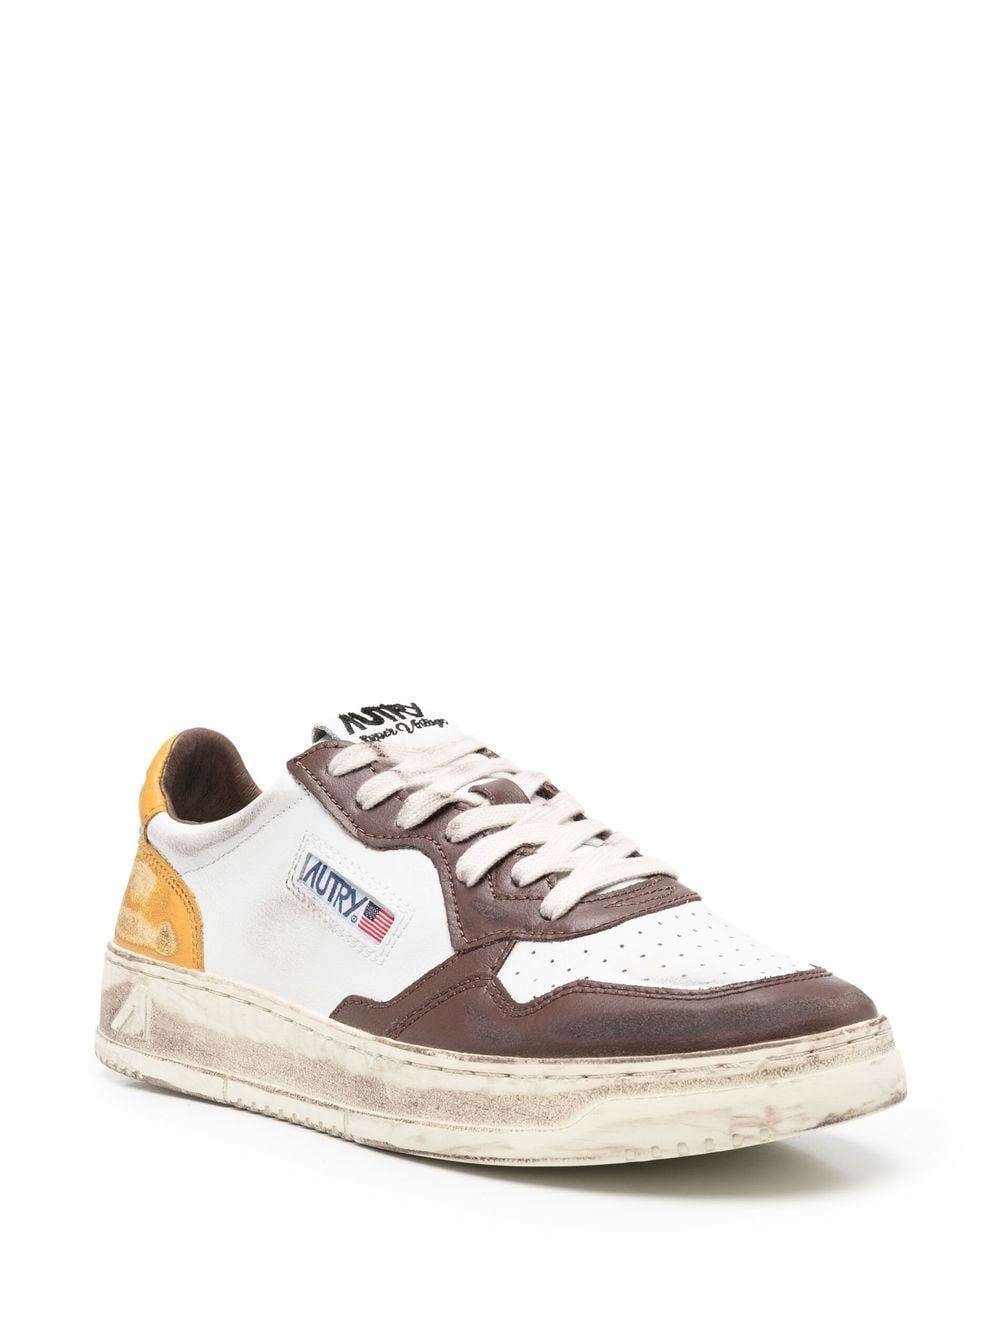 Yellow and brown multicolor vintage sneaker